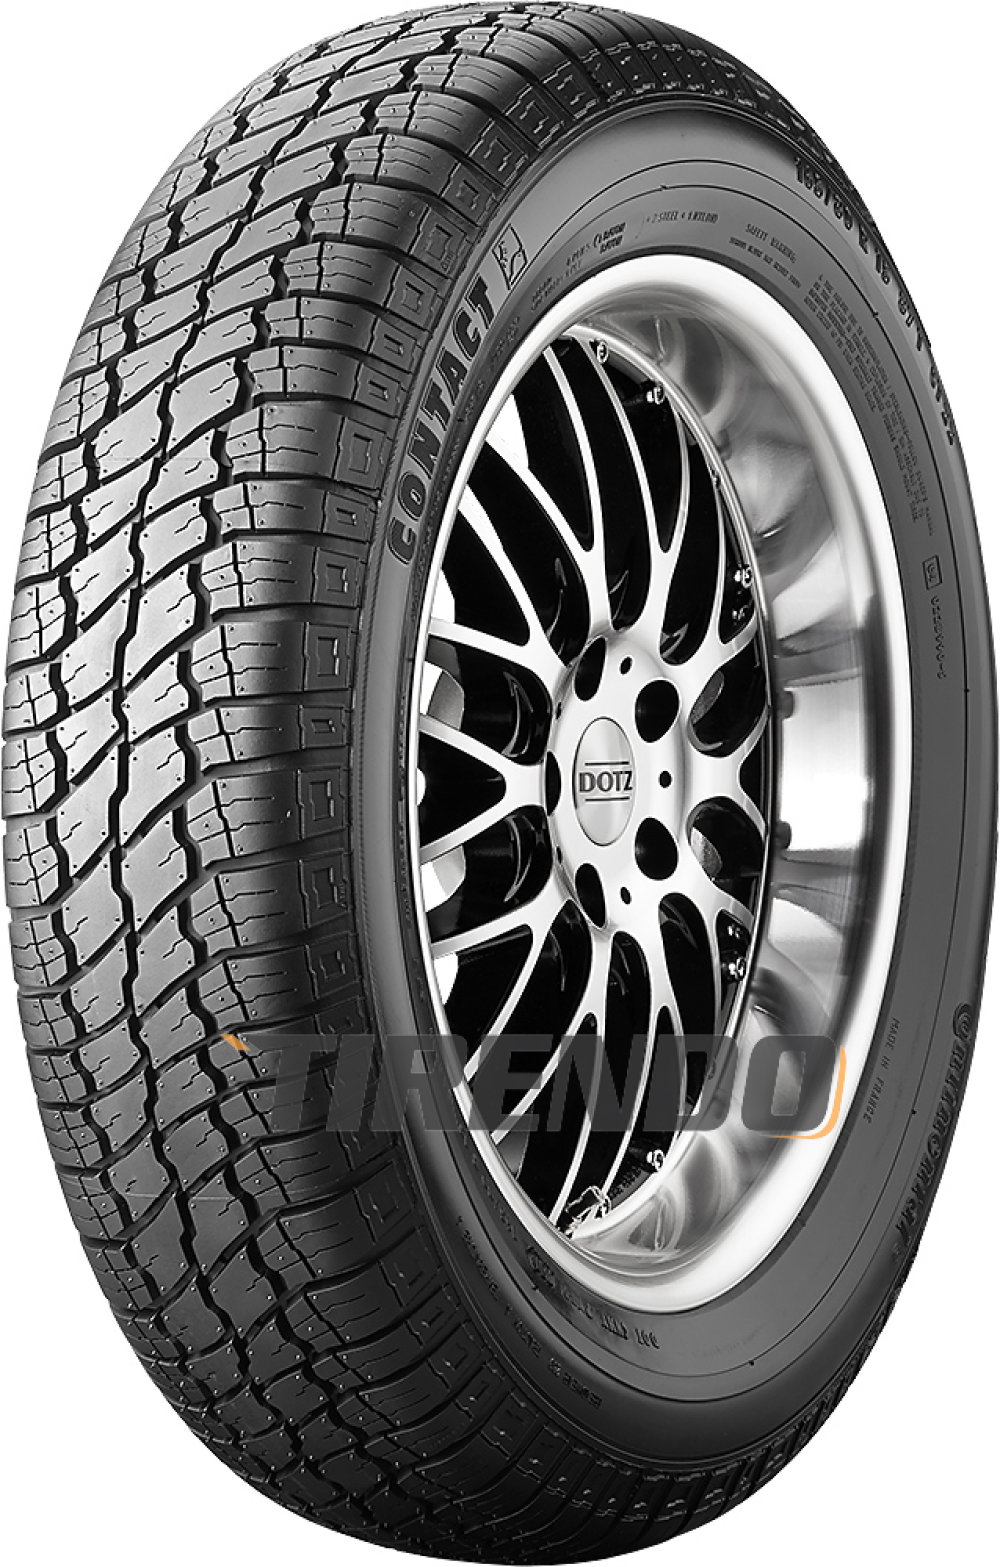 Continental Contact CT 22 ( 165/80 R15 87T ) von Continental